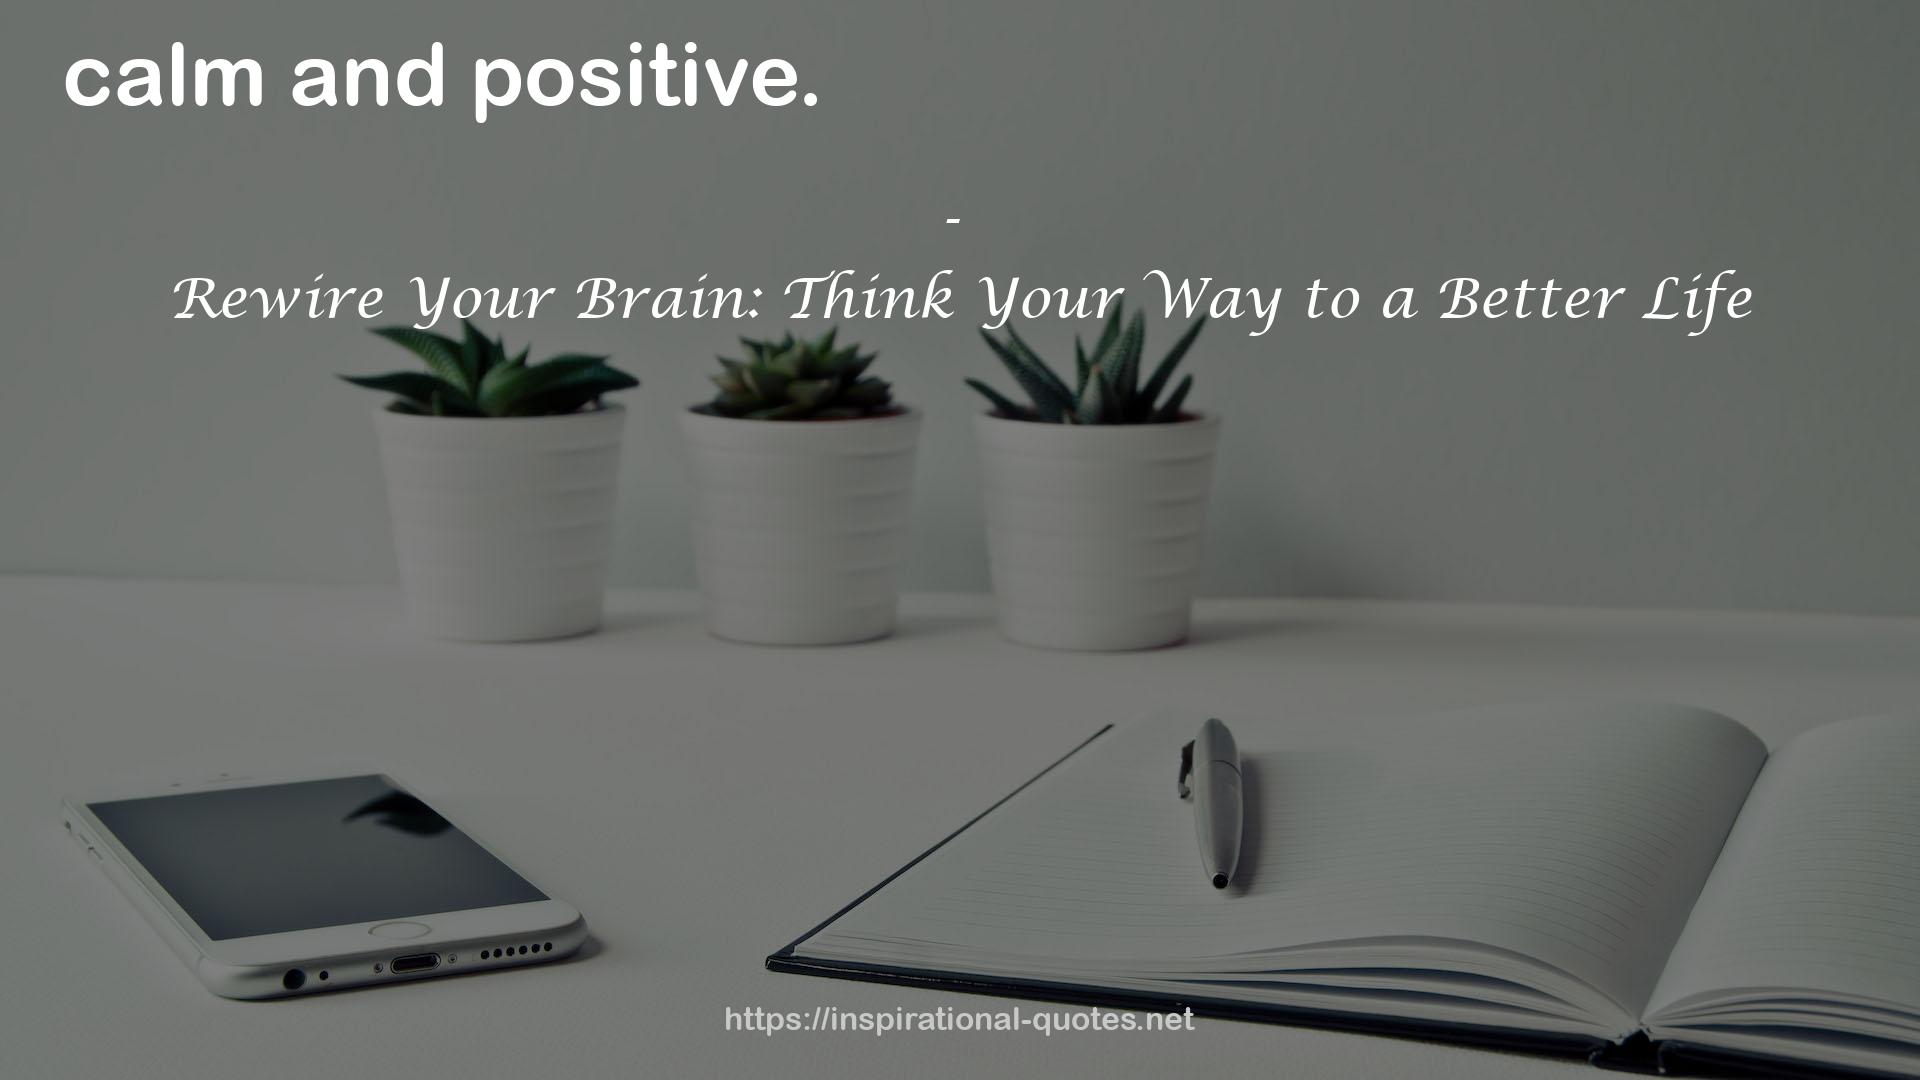 Rewire Your Brain: Think Your Way to a Better Life QUOTES